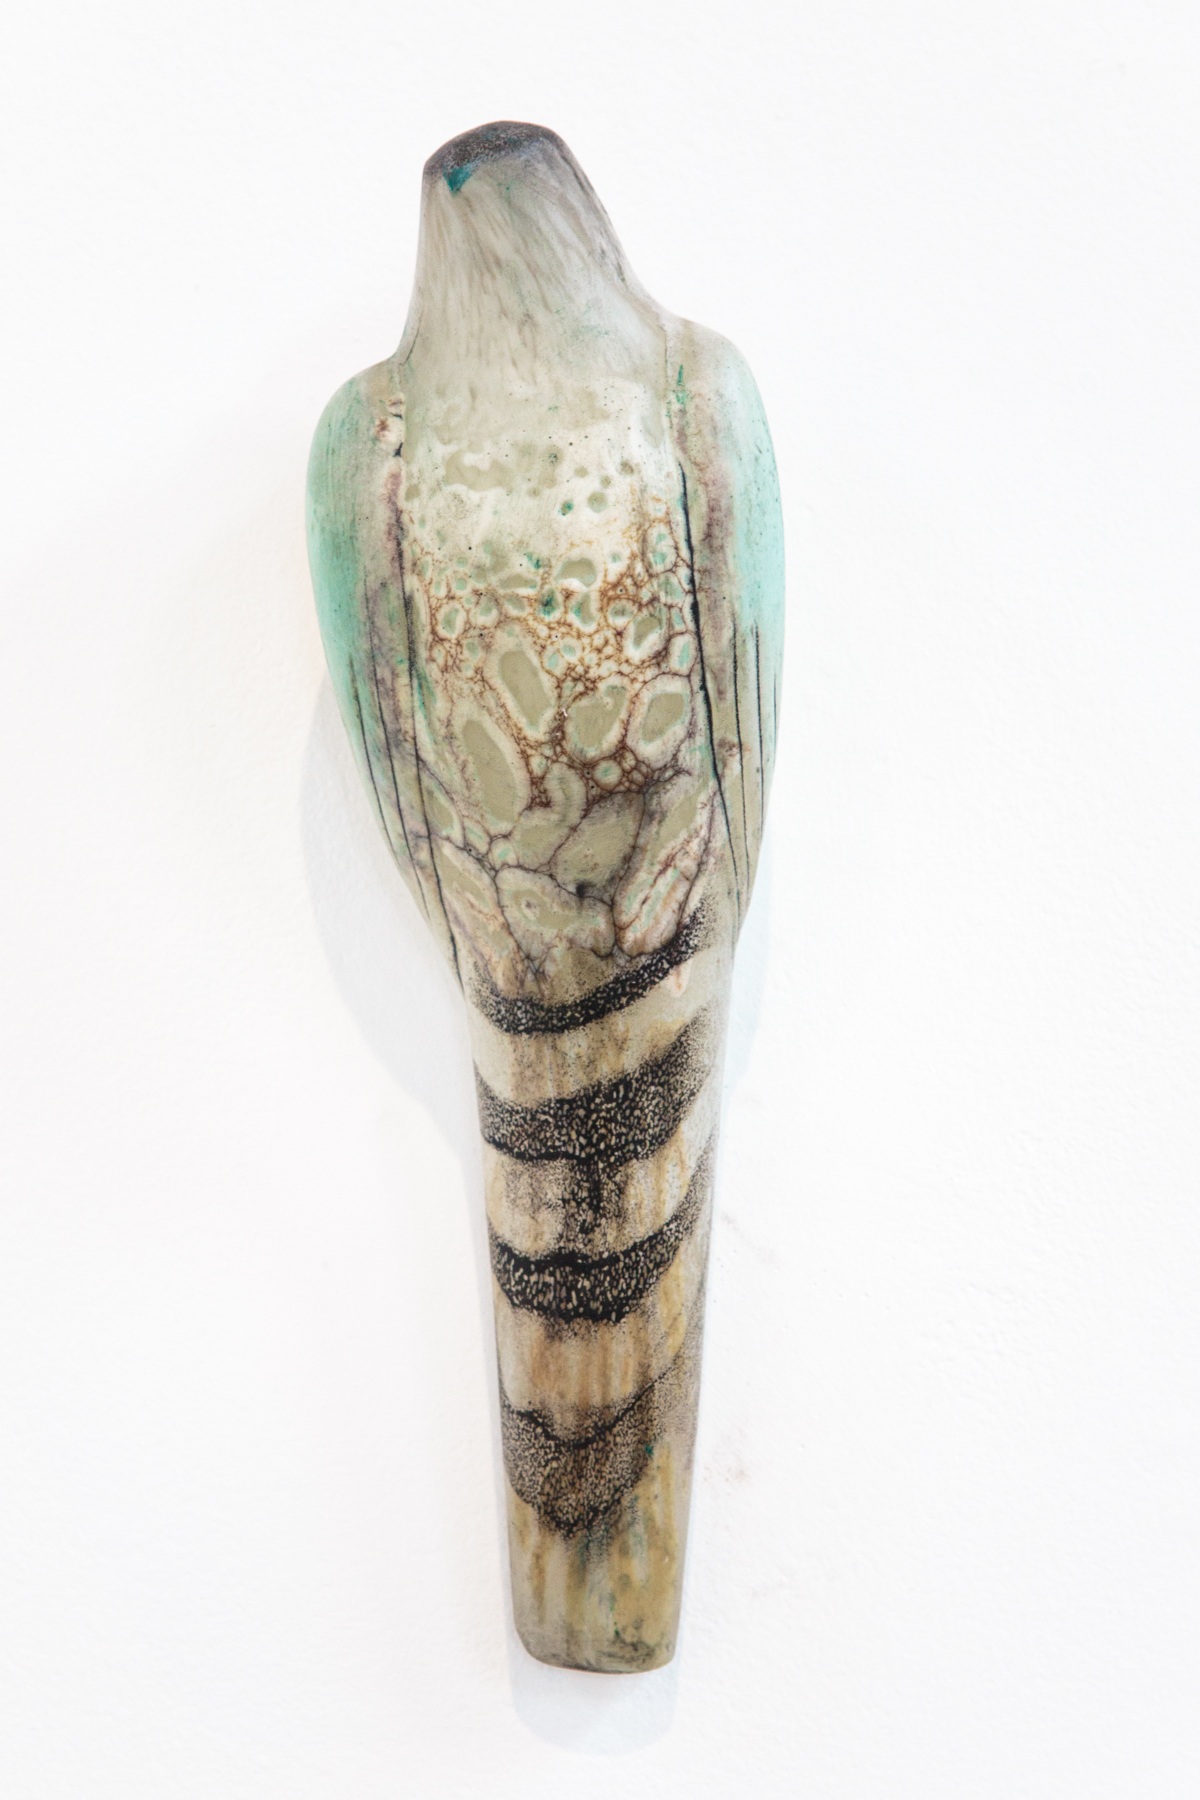  “Celadon Lace Wall Bird,” 2018 Hand blown pigmented glass 16 x 5 x 4 inches 